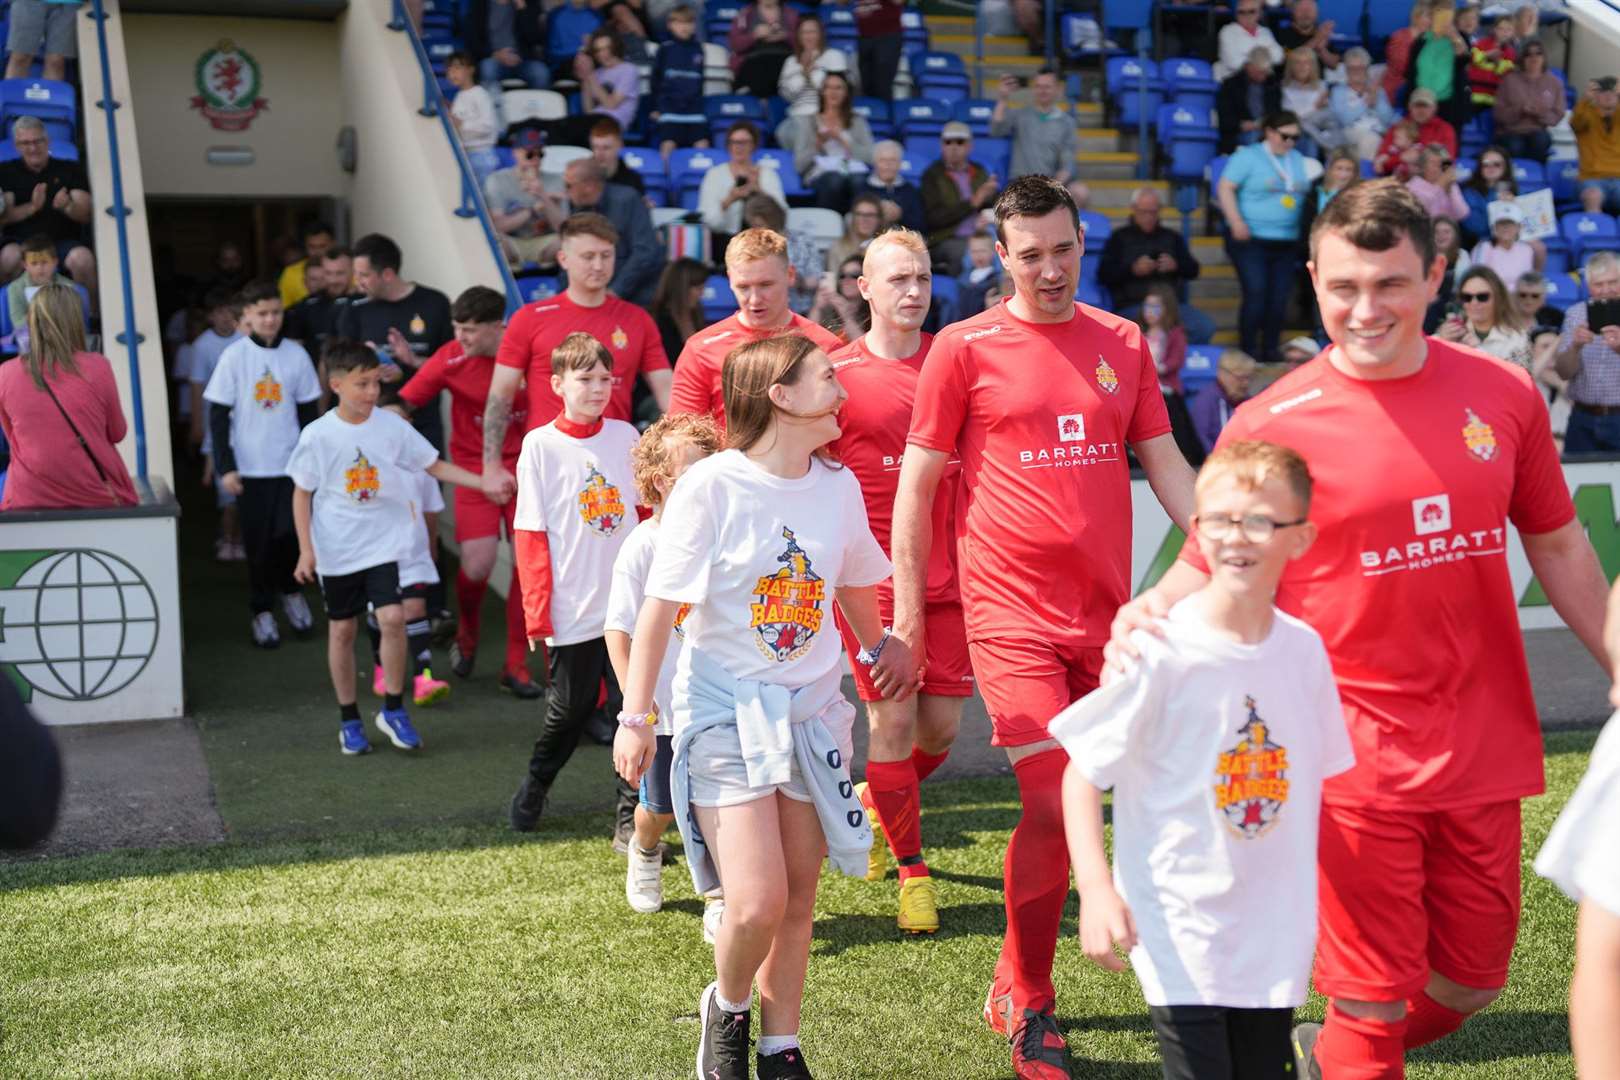 The Archie Foundation is calling for youngsters who have been supported by the services provided by the charity to apply to be a Battle of the Badges mascot.